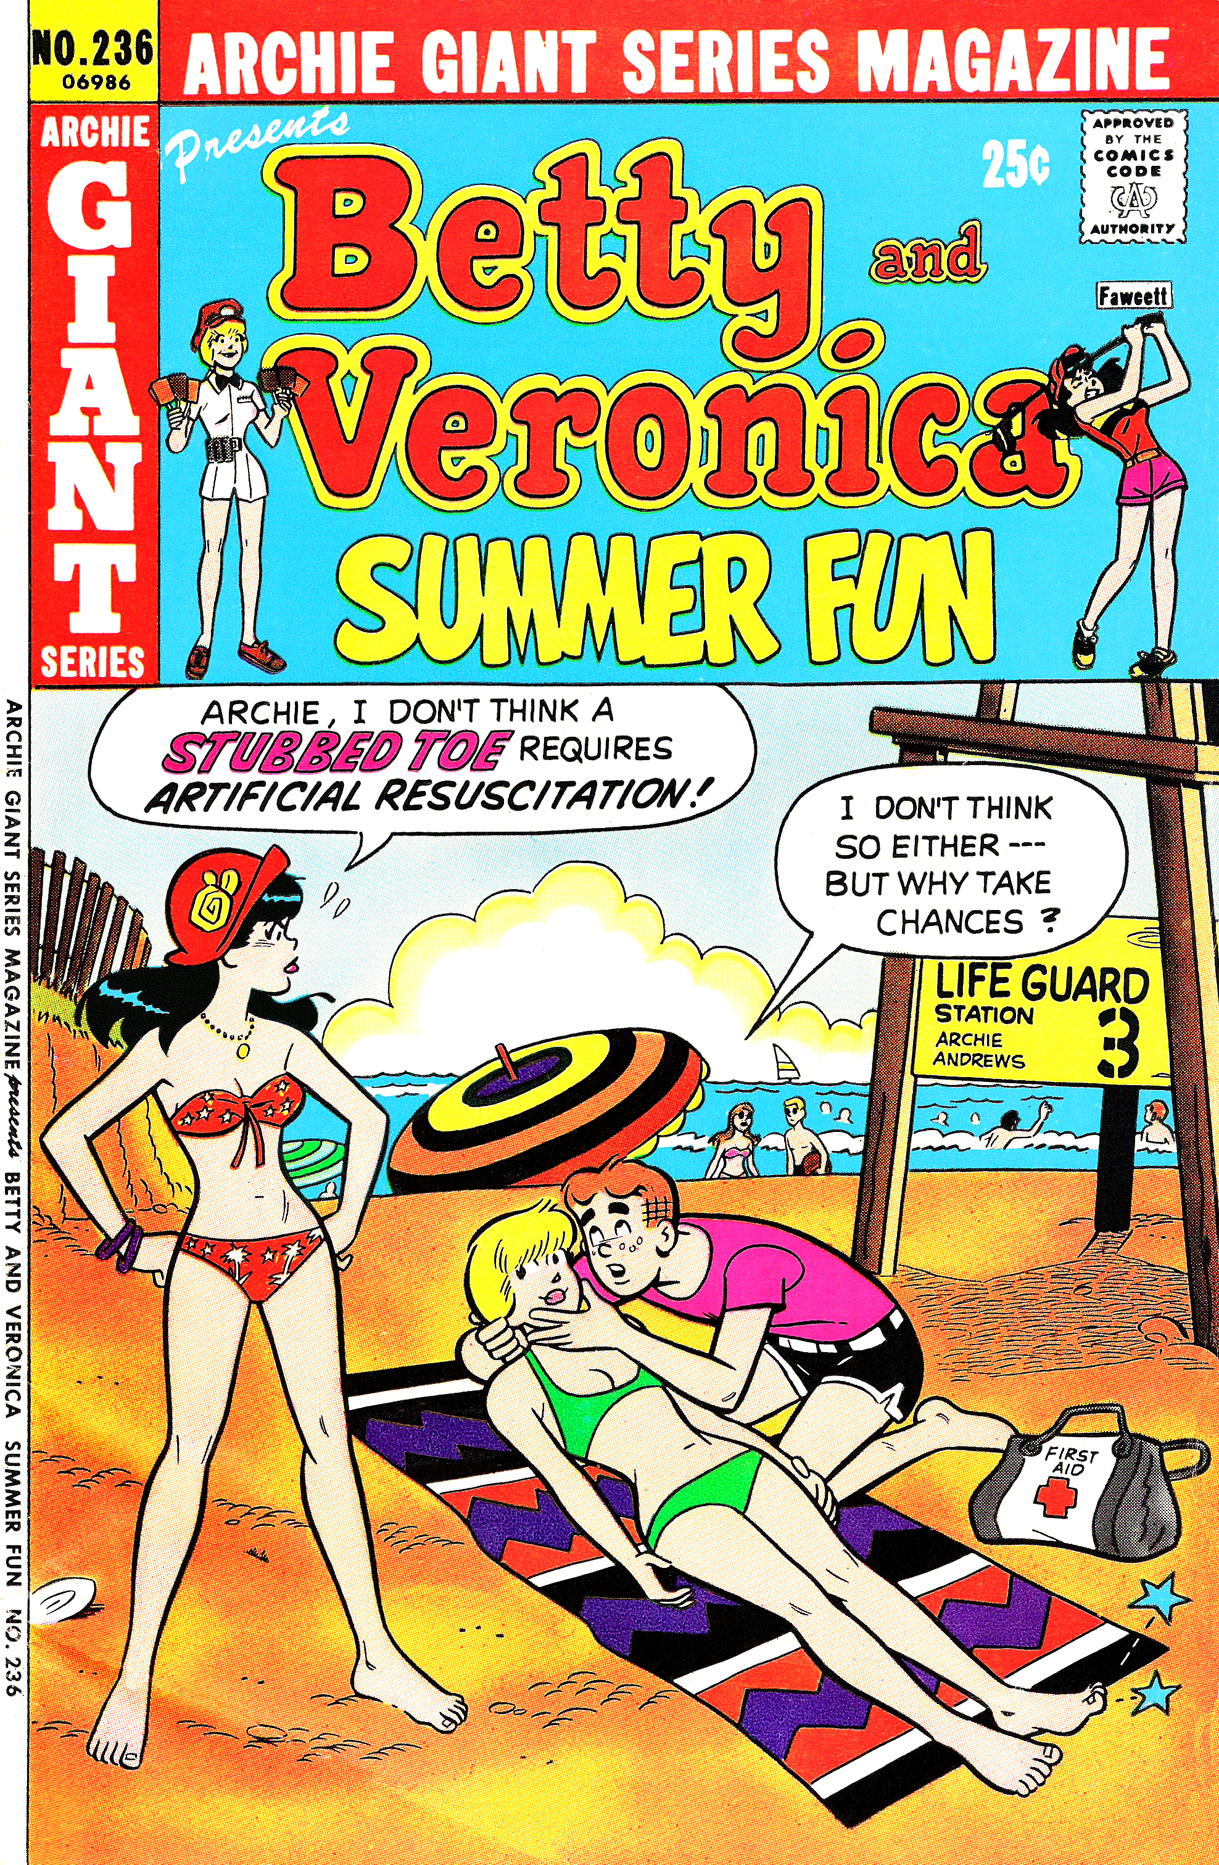 Read online Archie Giant Series Magazine comic -  Issue #236 - 1